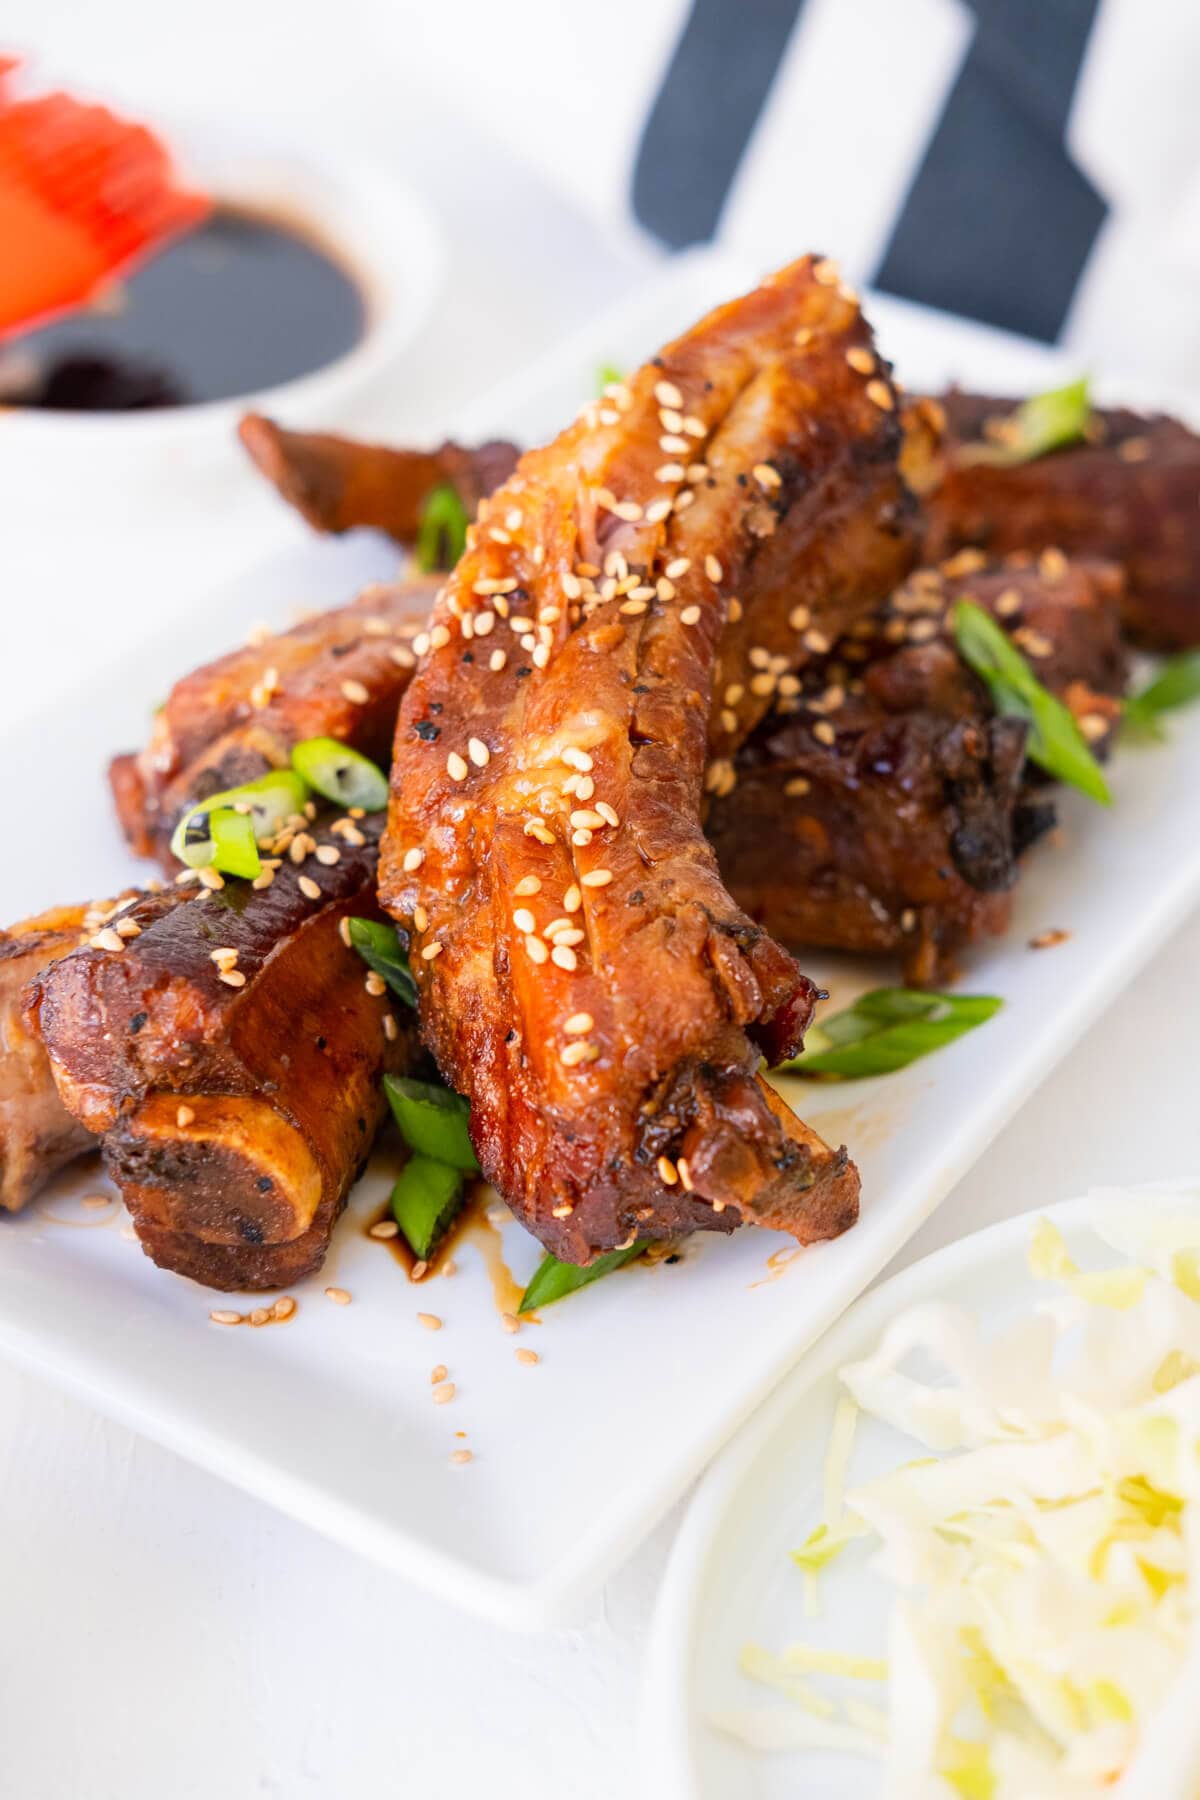 Slow cooker teriyaki ribs with white sesame seeds and chopped green onion on top.